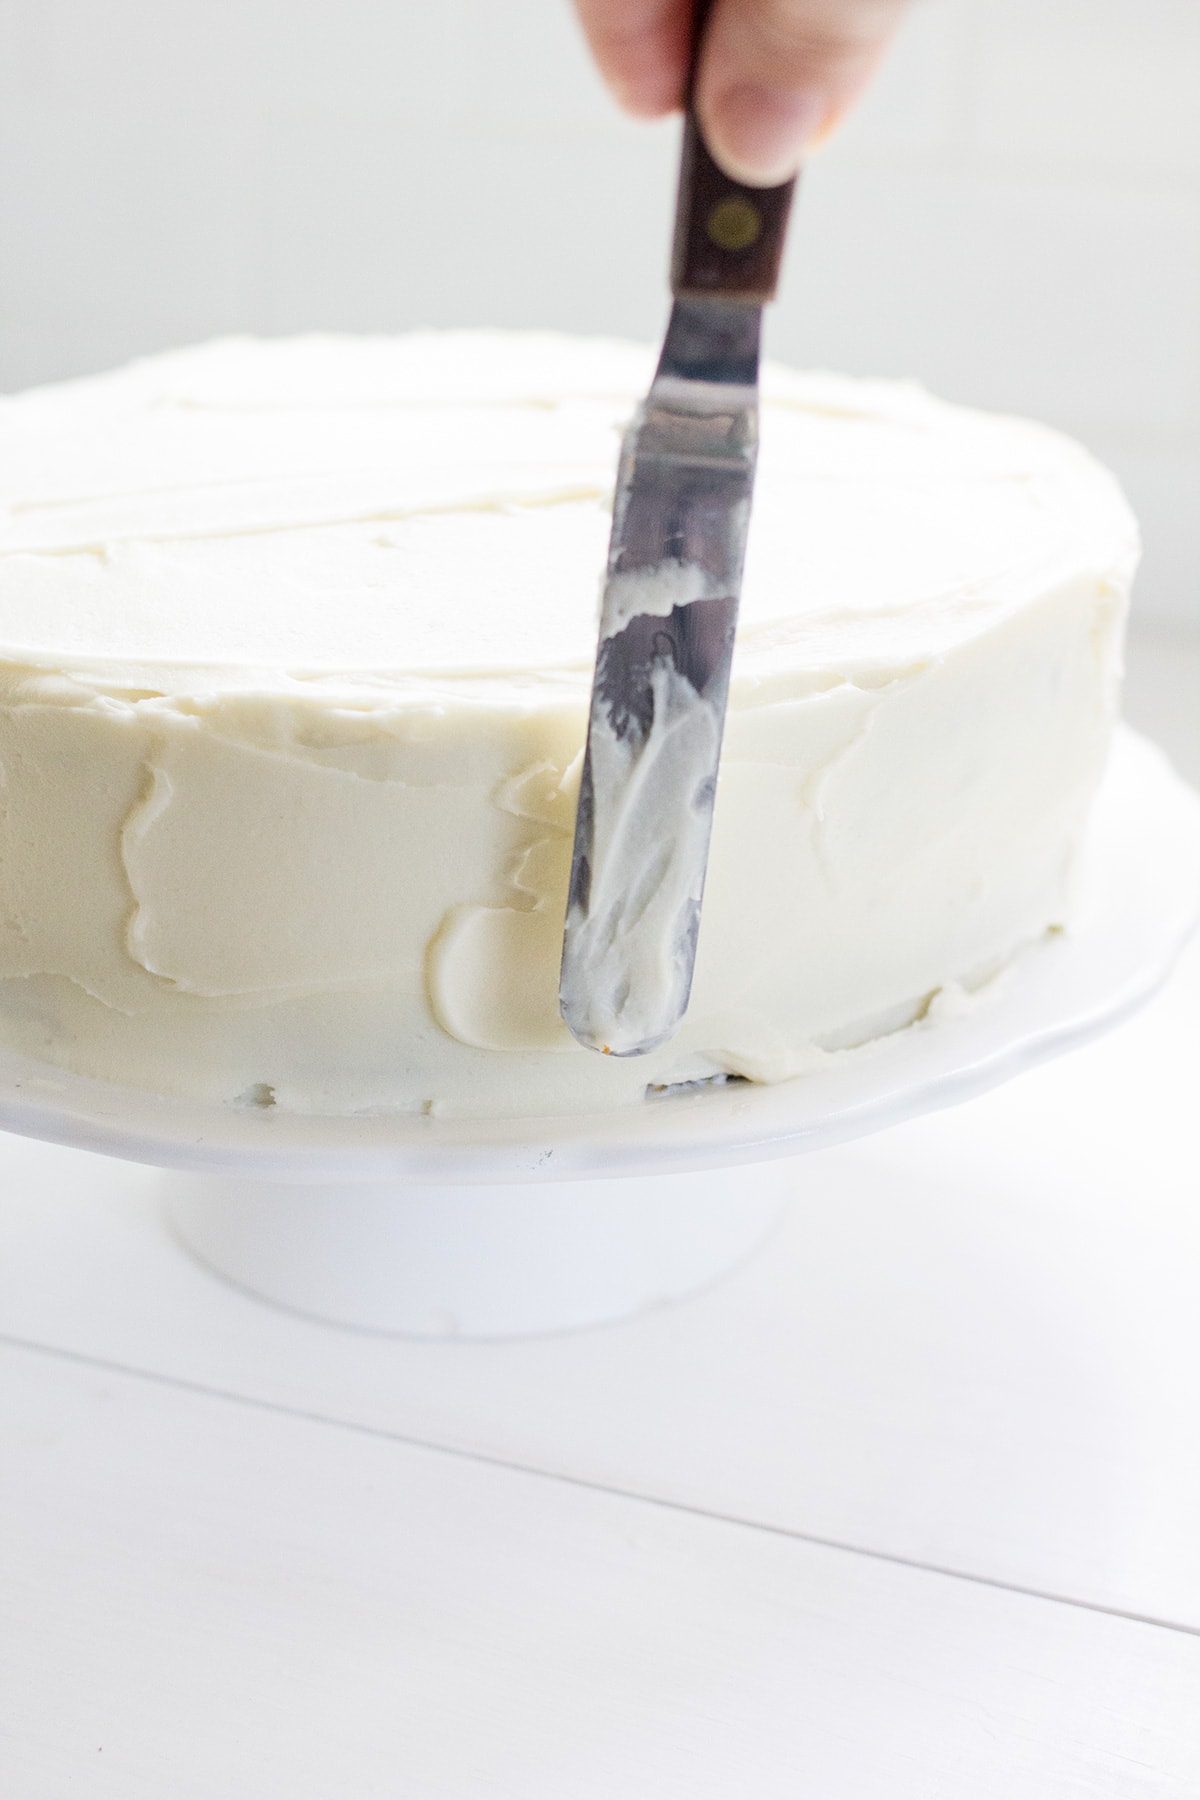 The Very Best Carrot Cake with Cream Cheese Frosting